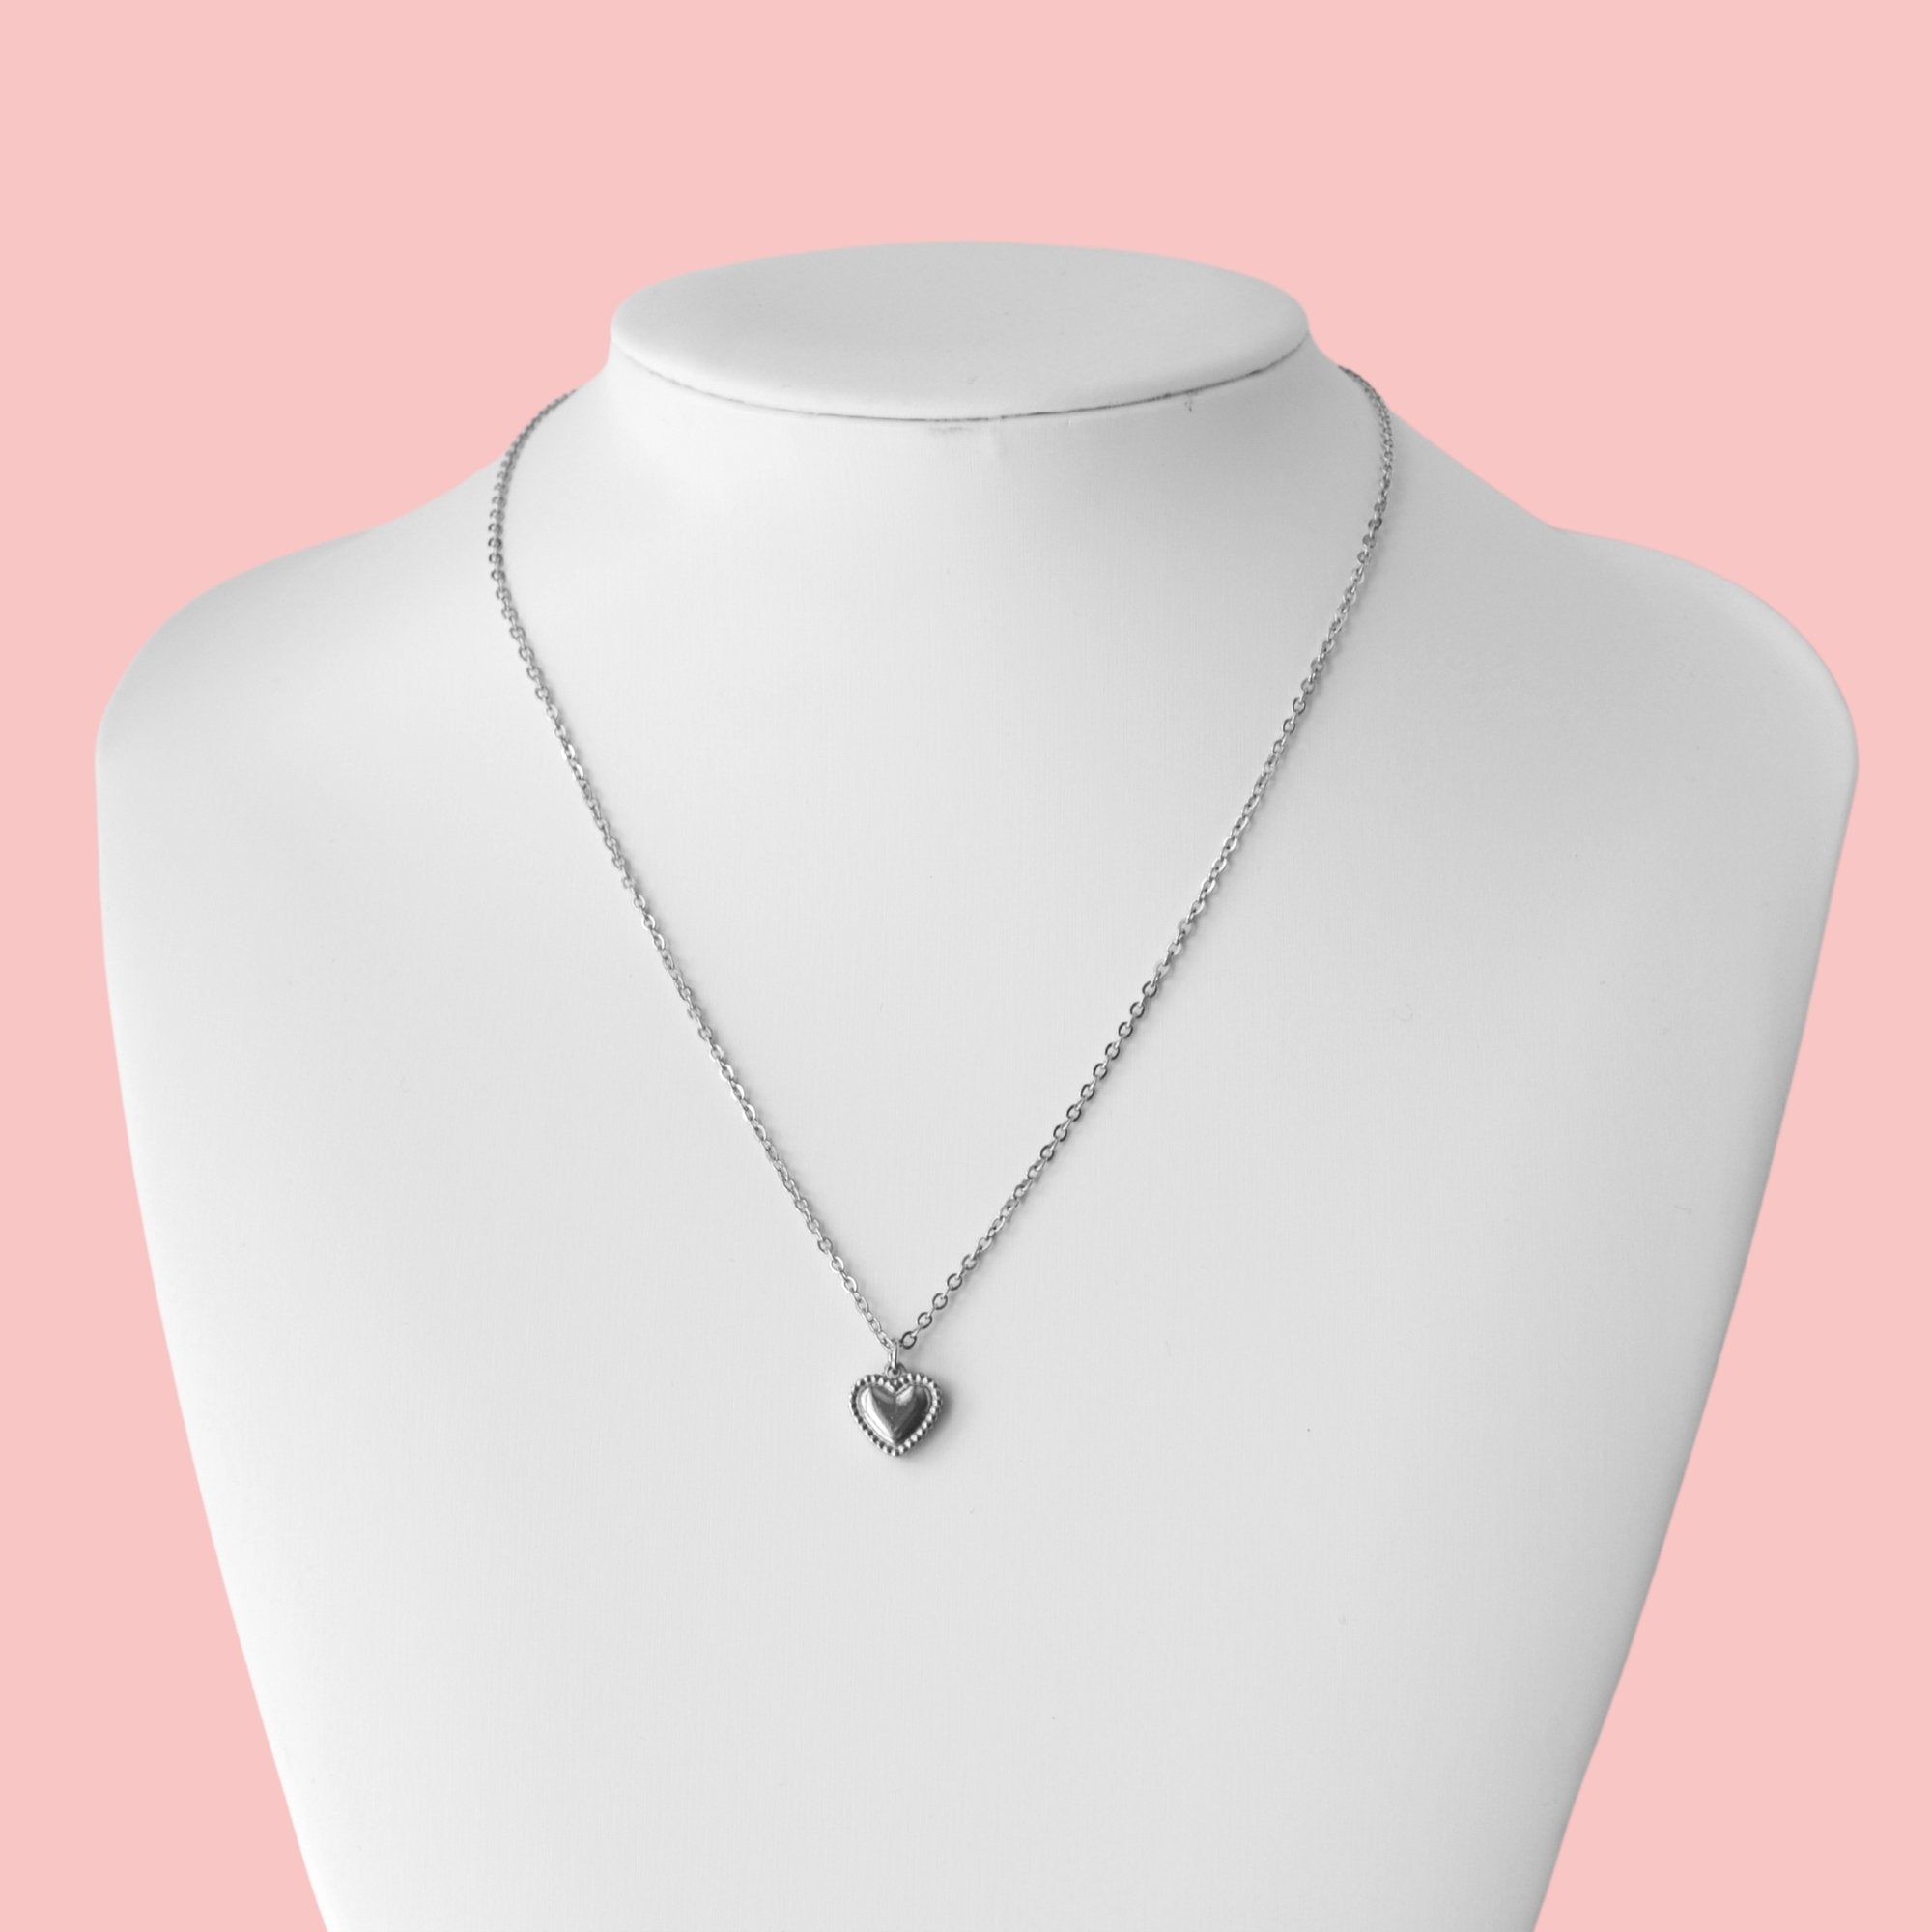 Shop Gold and Sterling Silver Necklaces for Women | Linjer